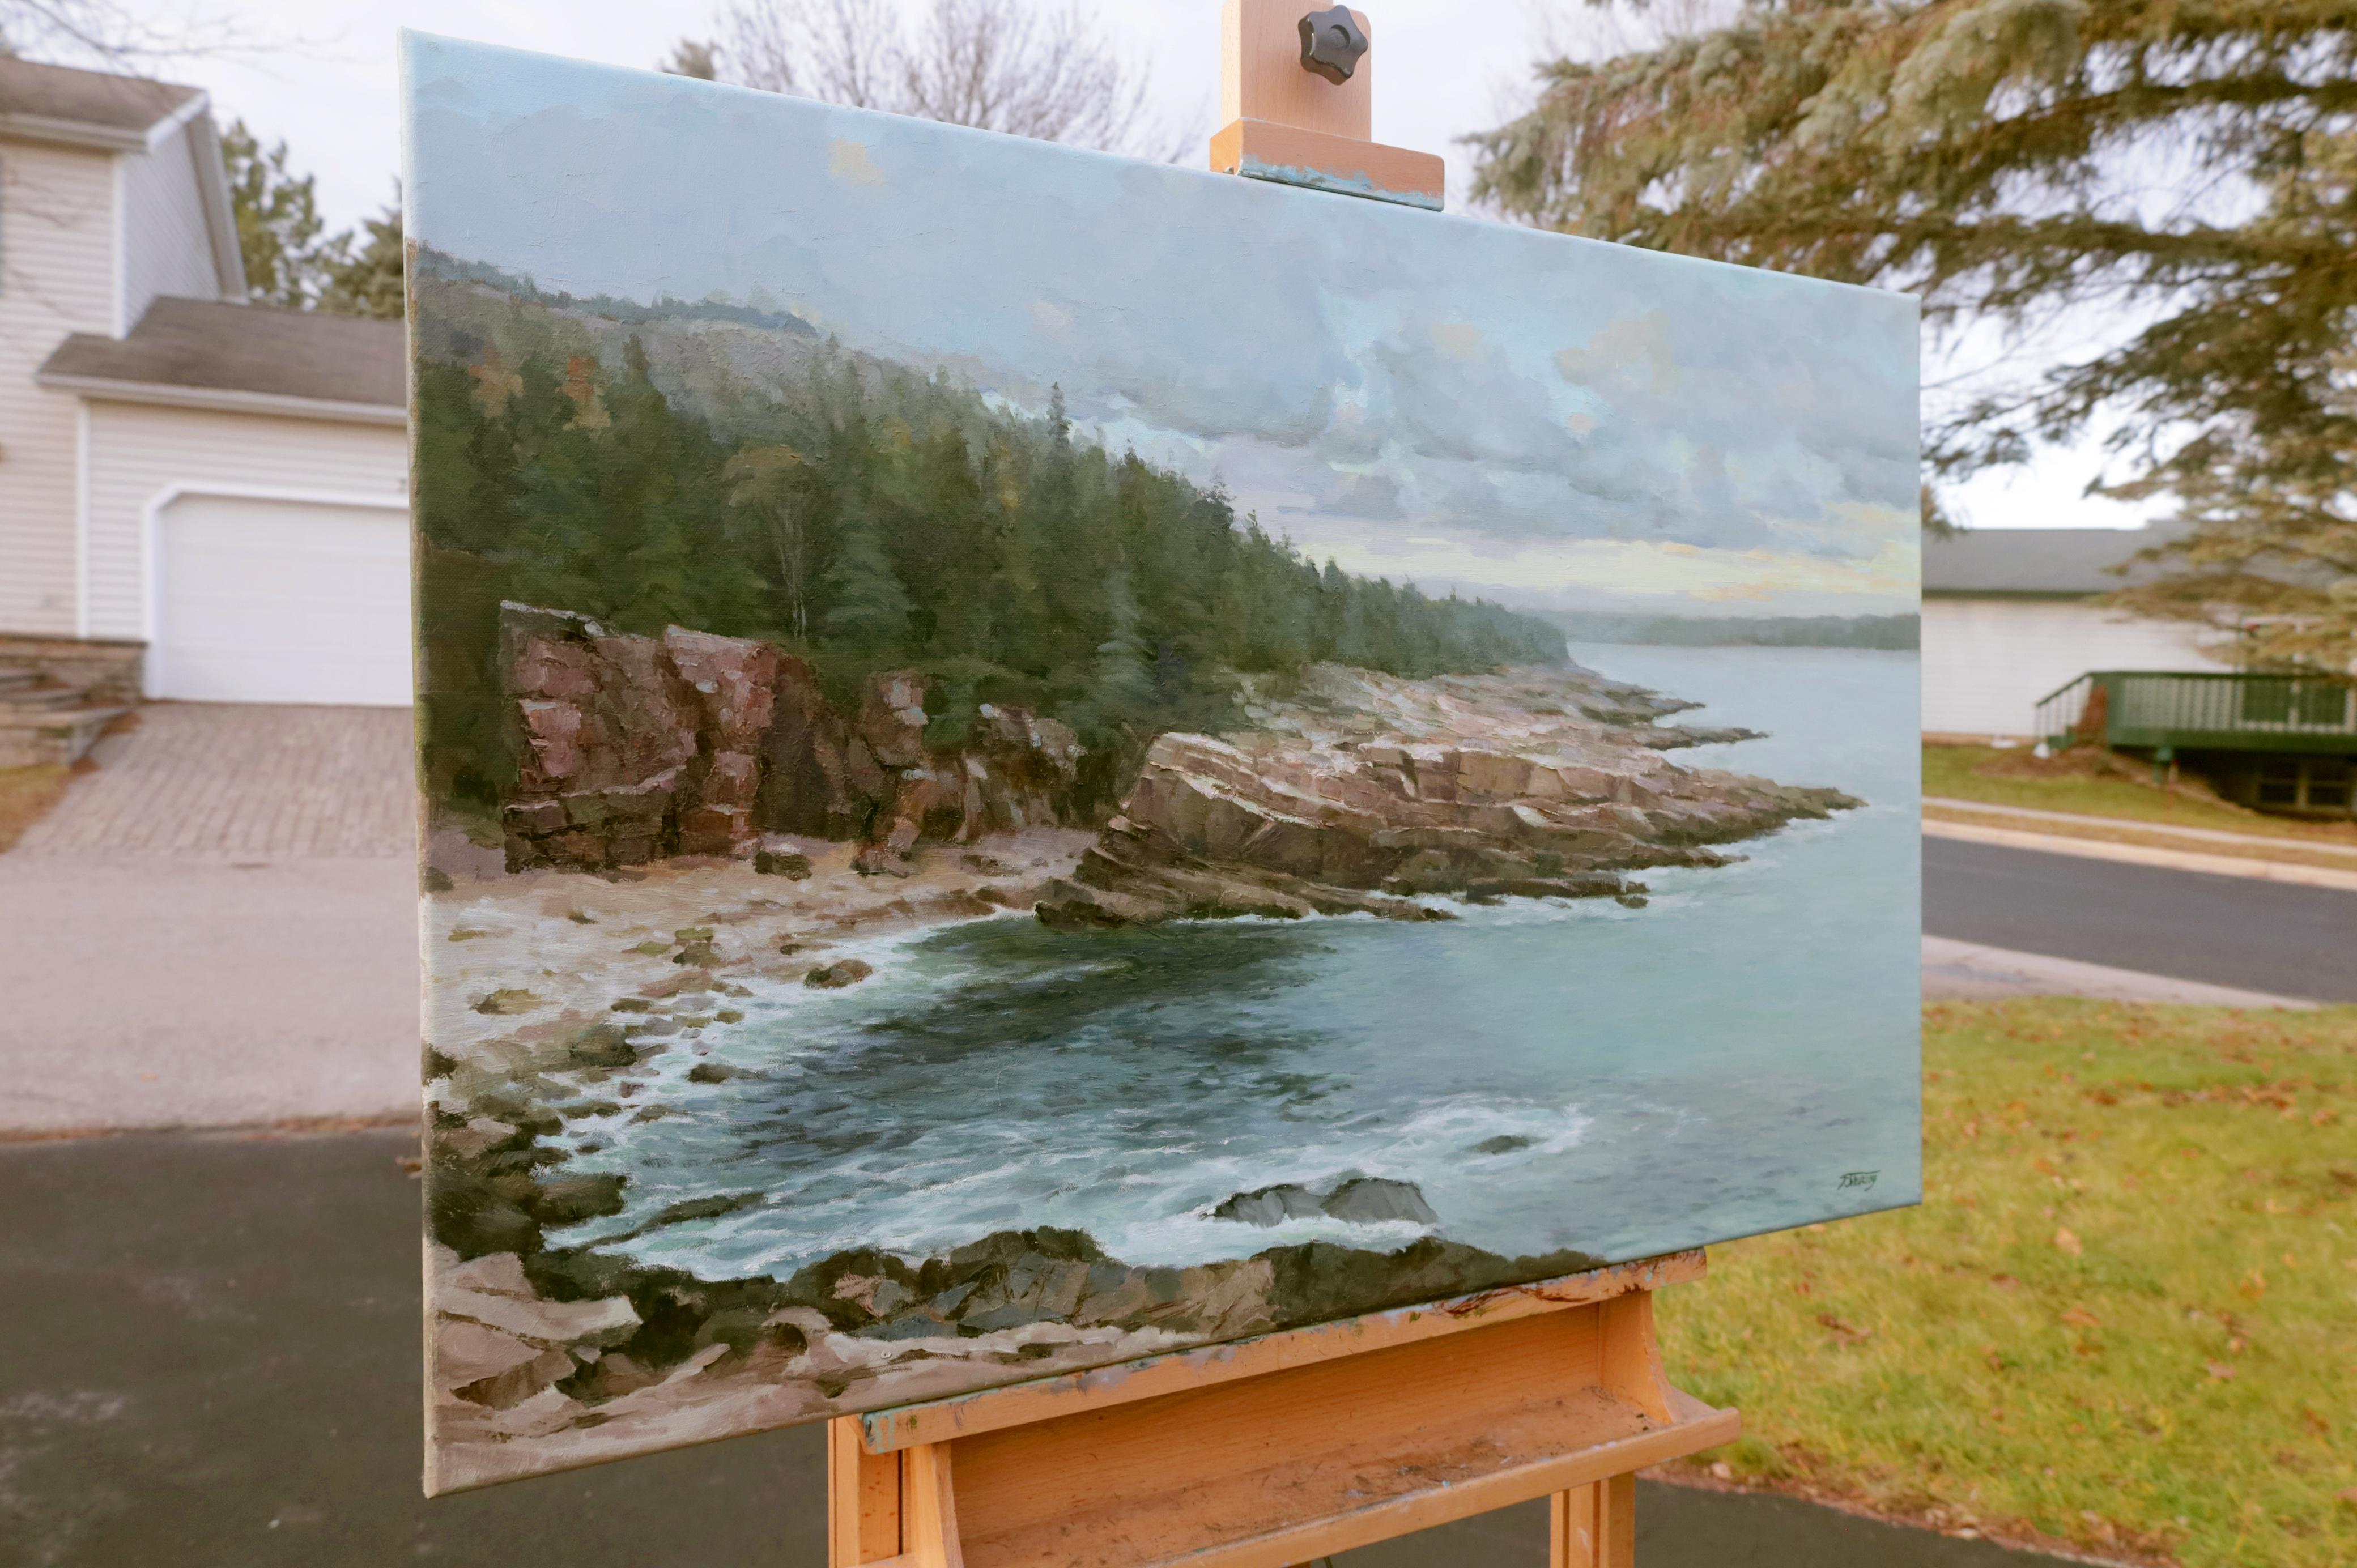 <p>Artist Comments<br>Calm waters meet the rocky shore in this view of the Great Lakes. A soft orange glow peeks behind the clouds, giving faint illumination to the scene. The detailed portrayal of the natural elements lends a realistic touch to the